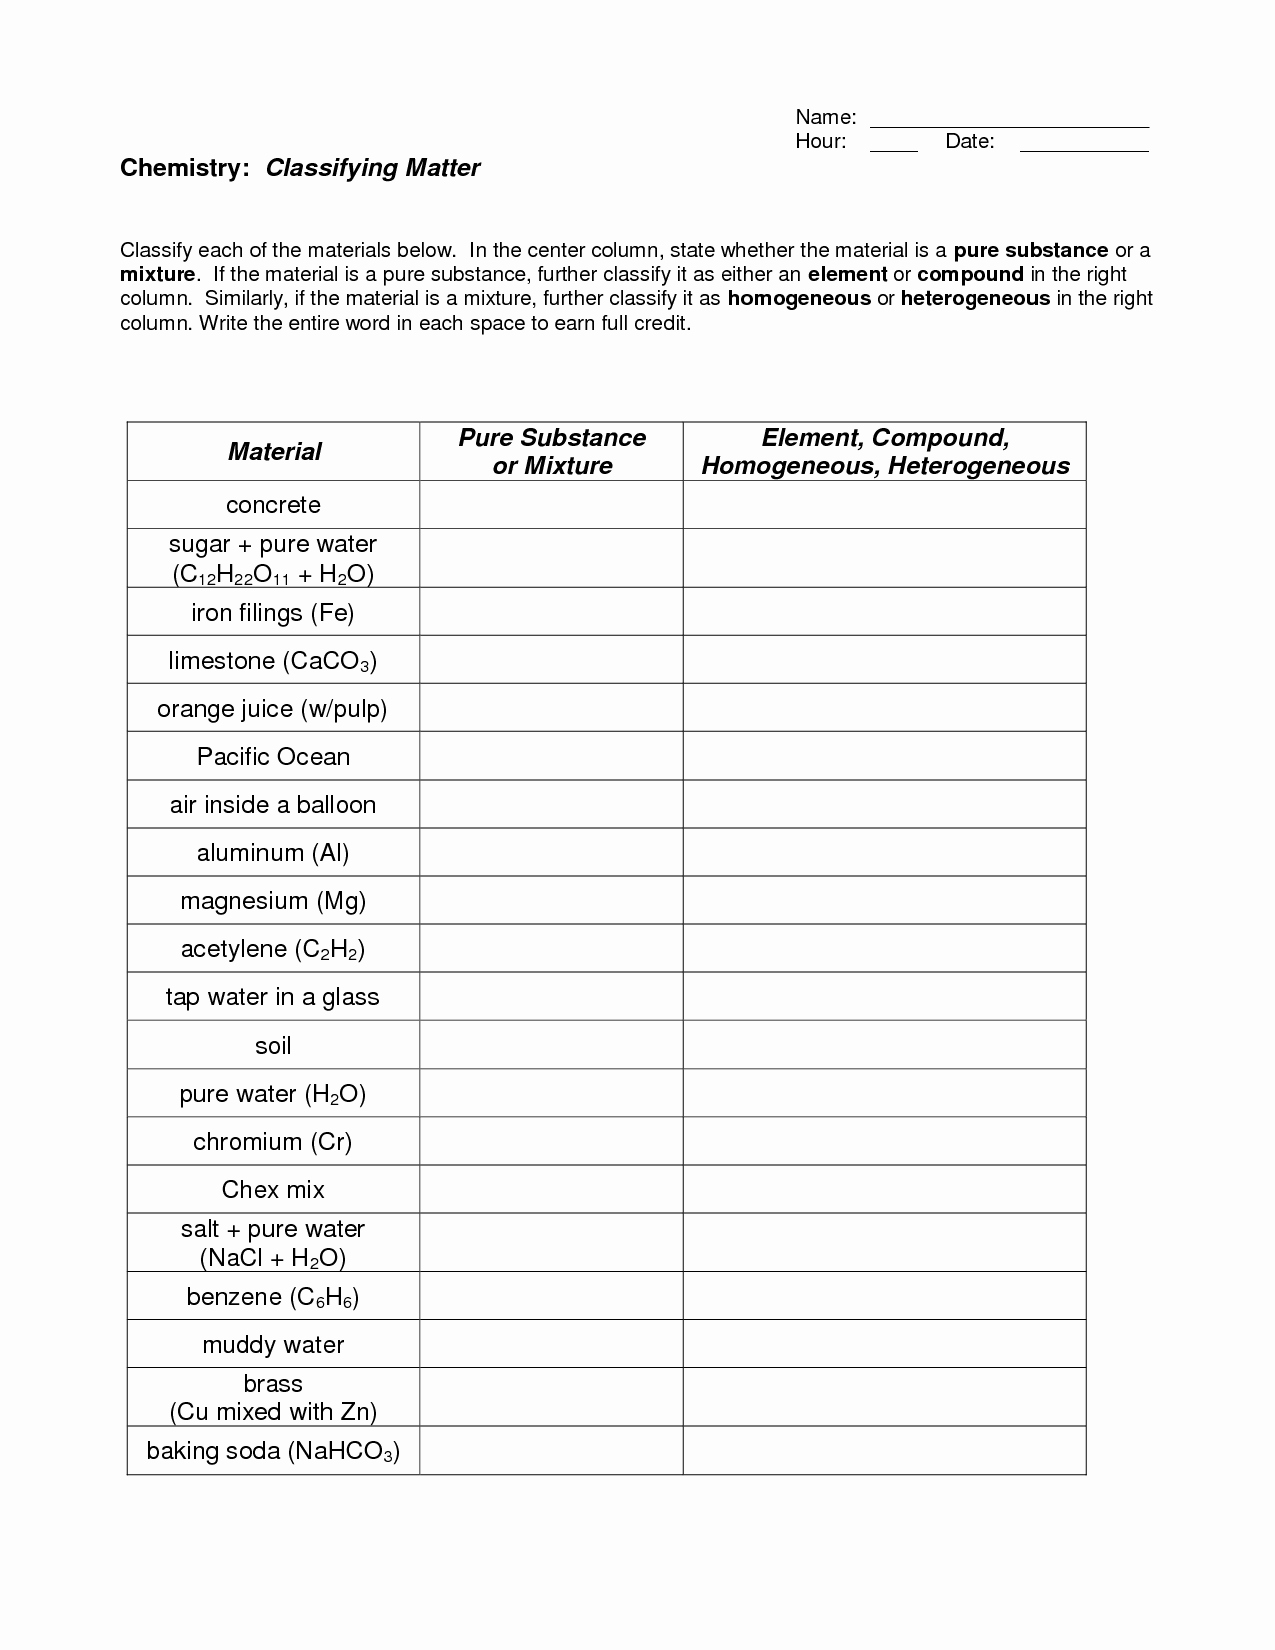 Chemistry Worksheet Matter 1 Answers Awesome Chemistry Worksheet Category Page 2 Worksheeto